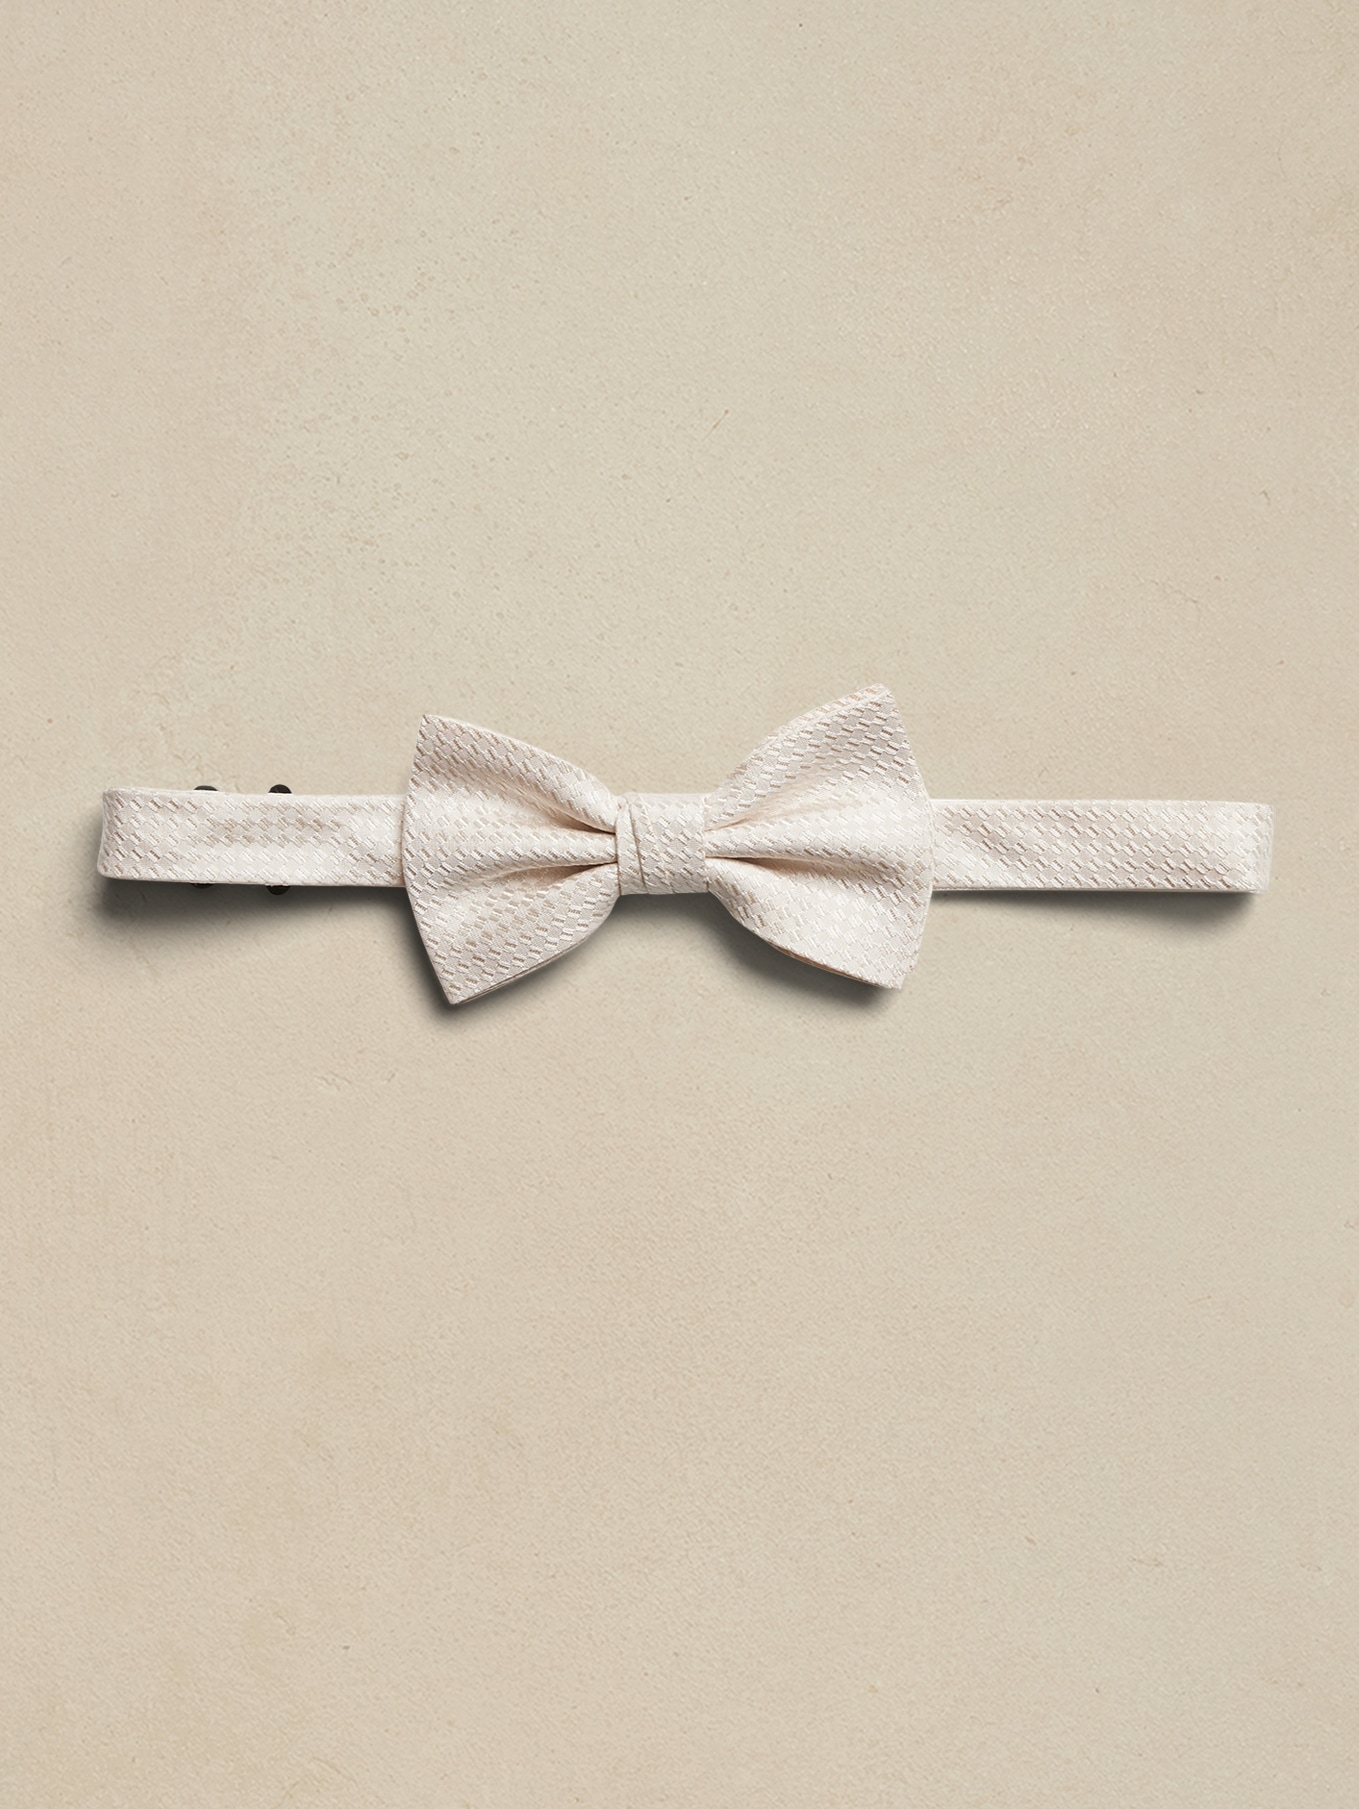 How To Tie A Bow Tie With Ribbon | tunersread.com